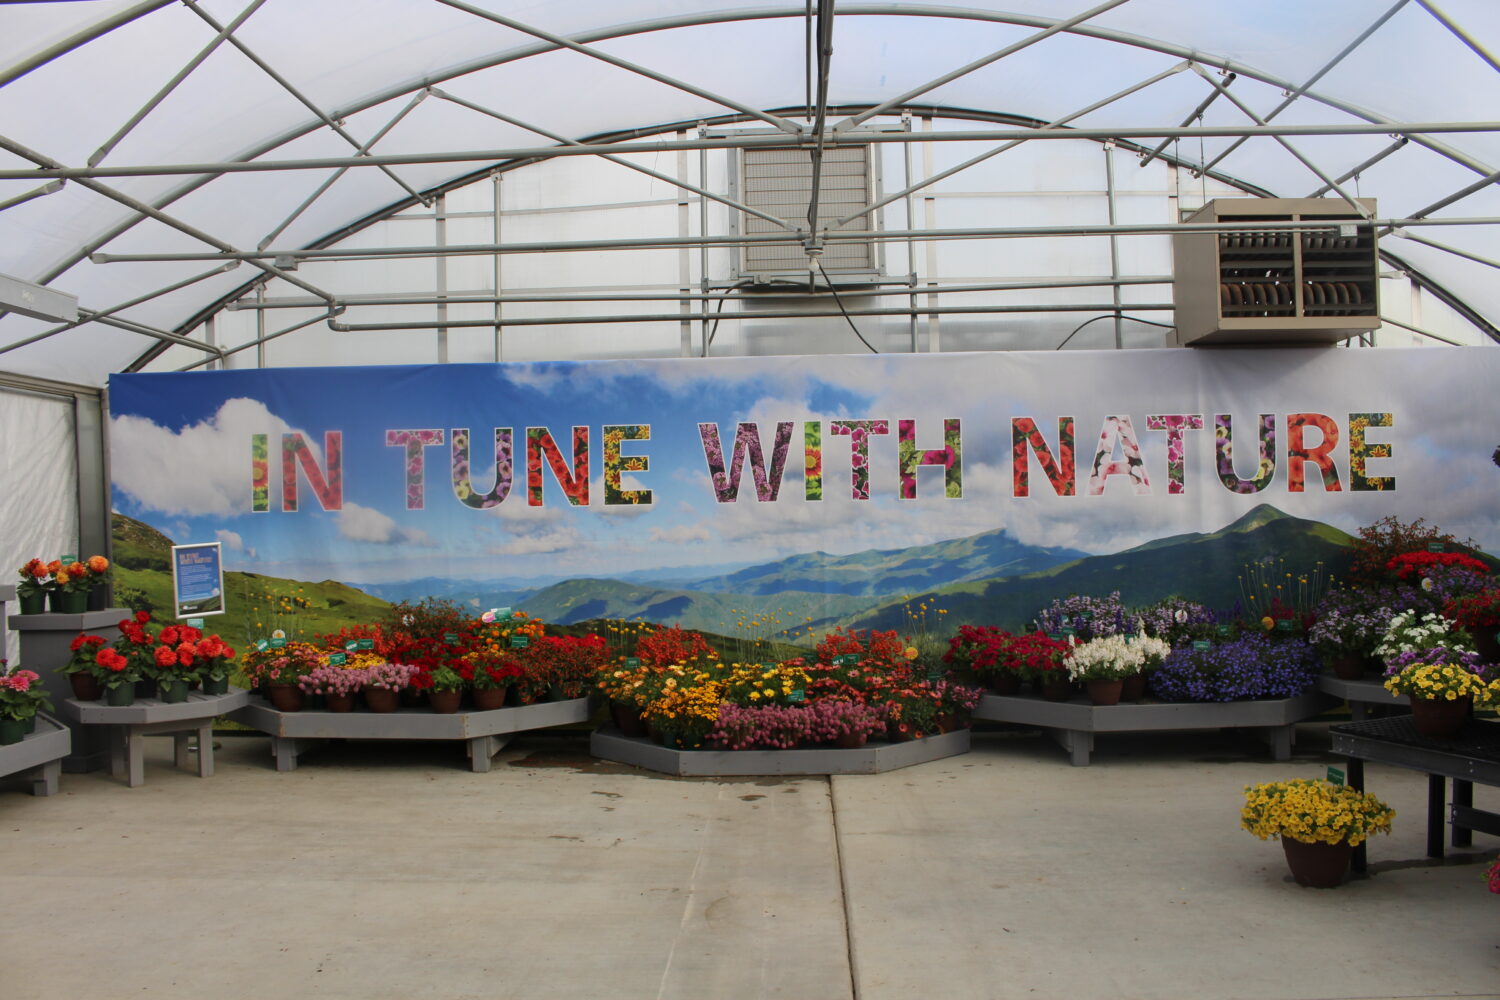 Danziger displays its commitment to nature with a wall-length banner.